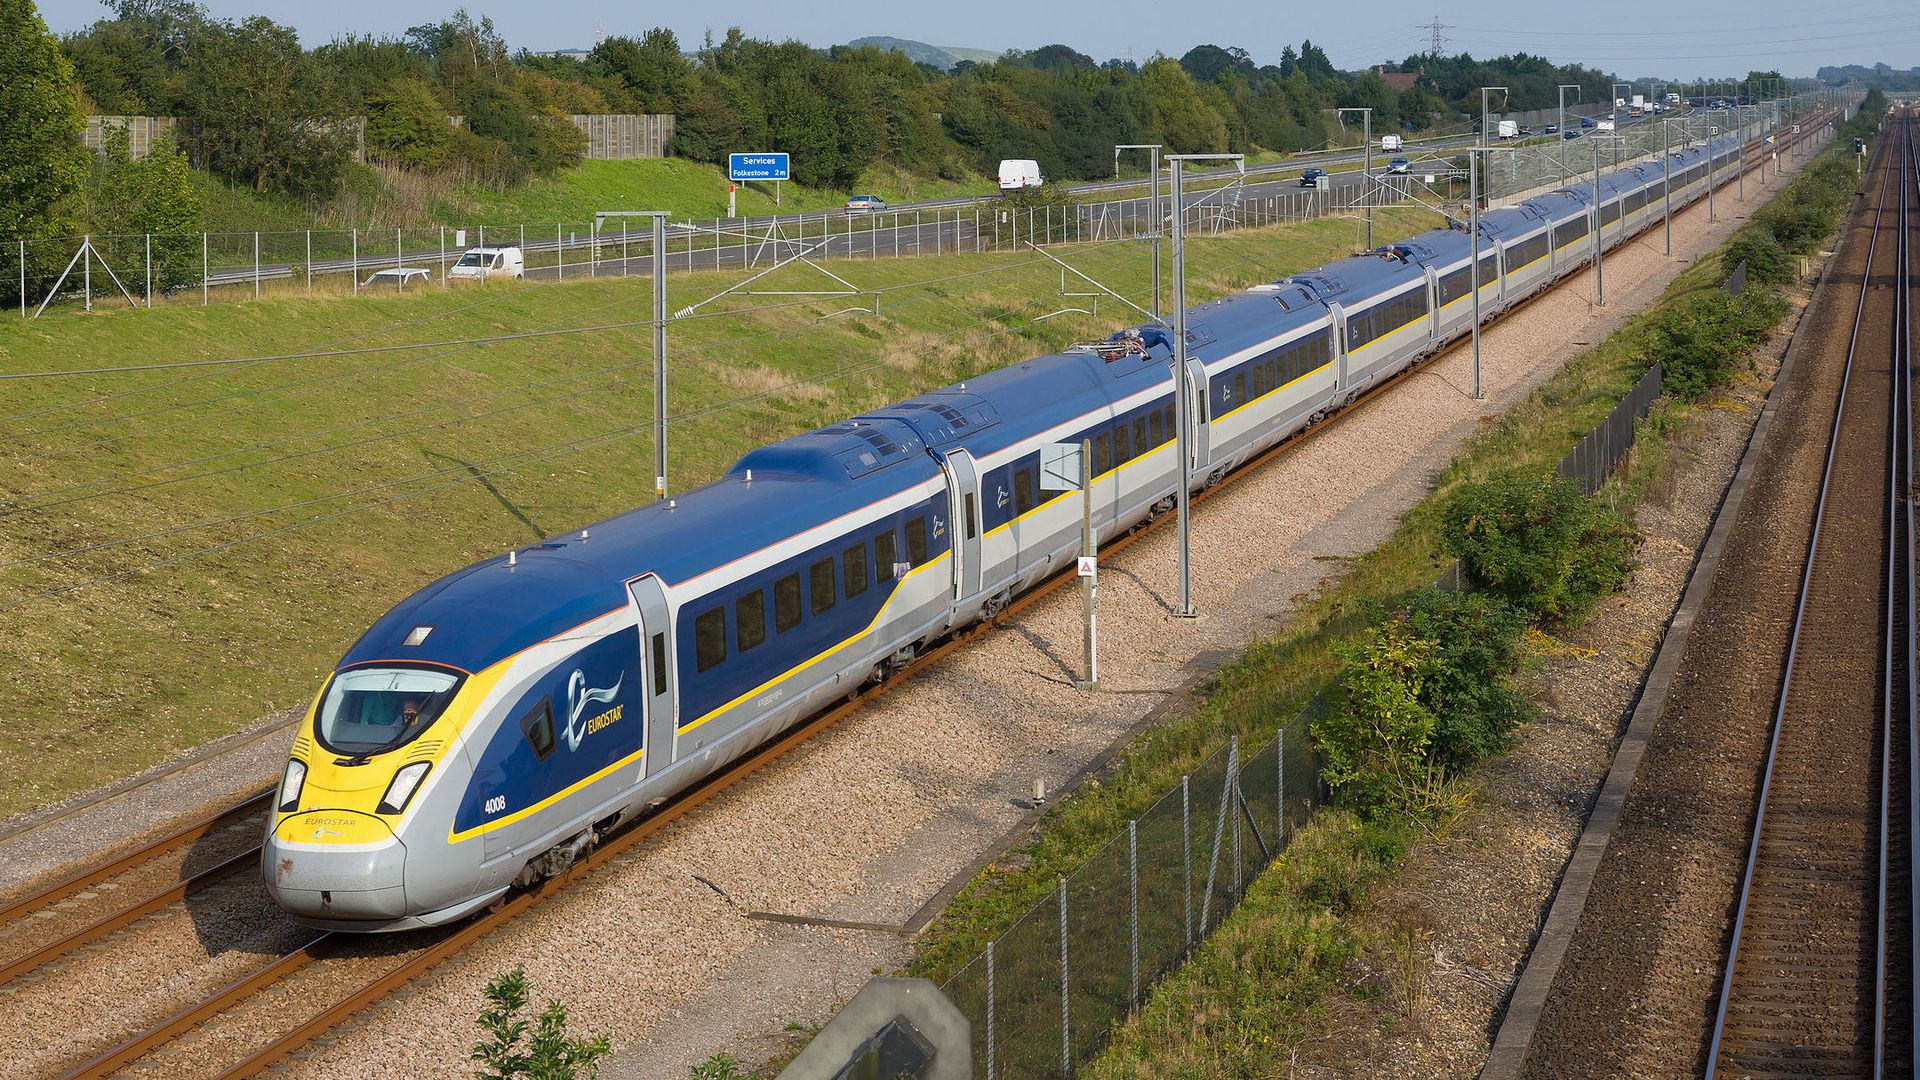 NS offers up to 75 discount on trains from the Netherlands to Belgium